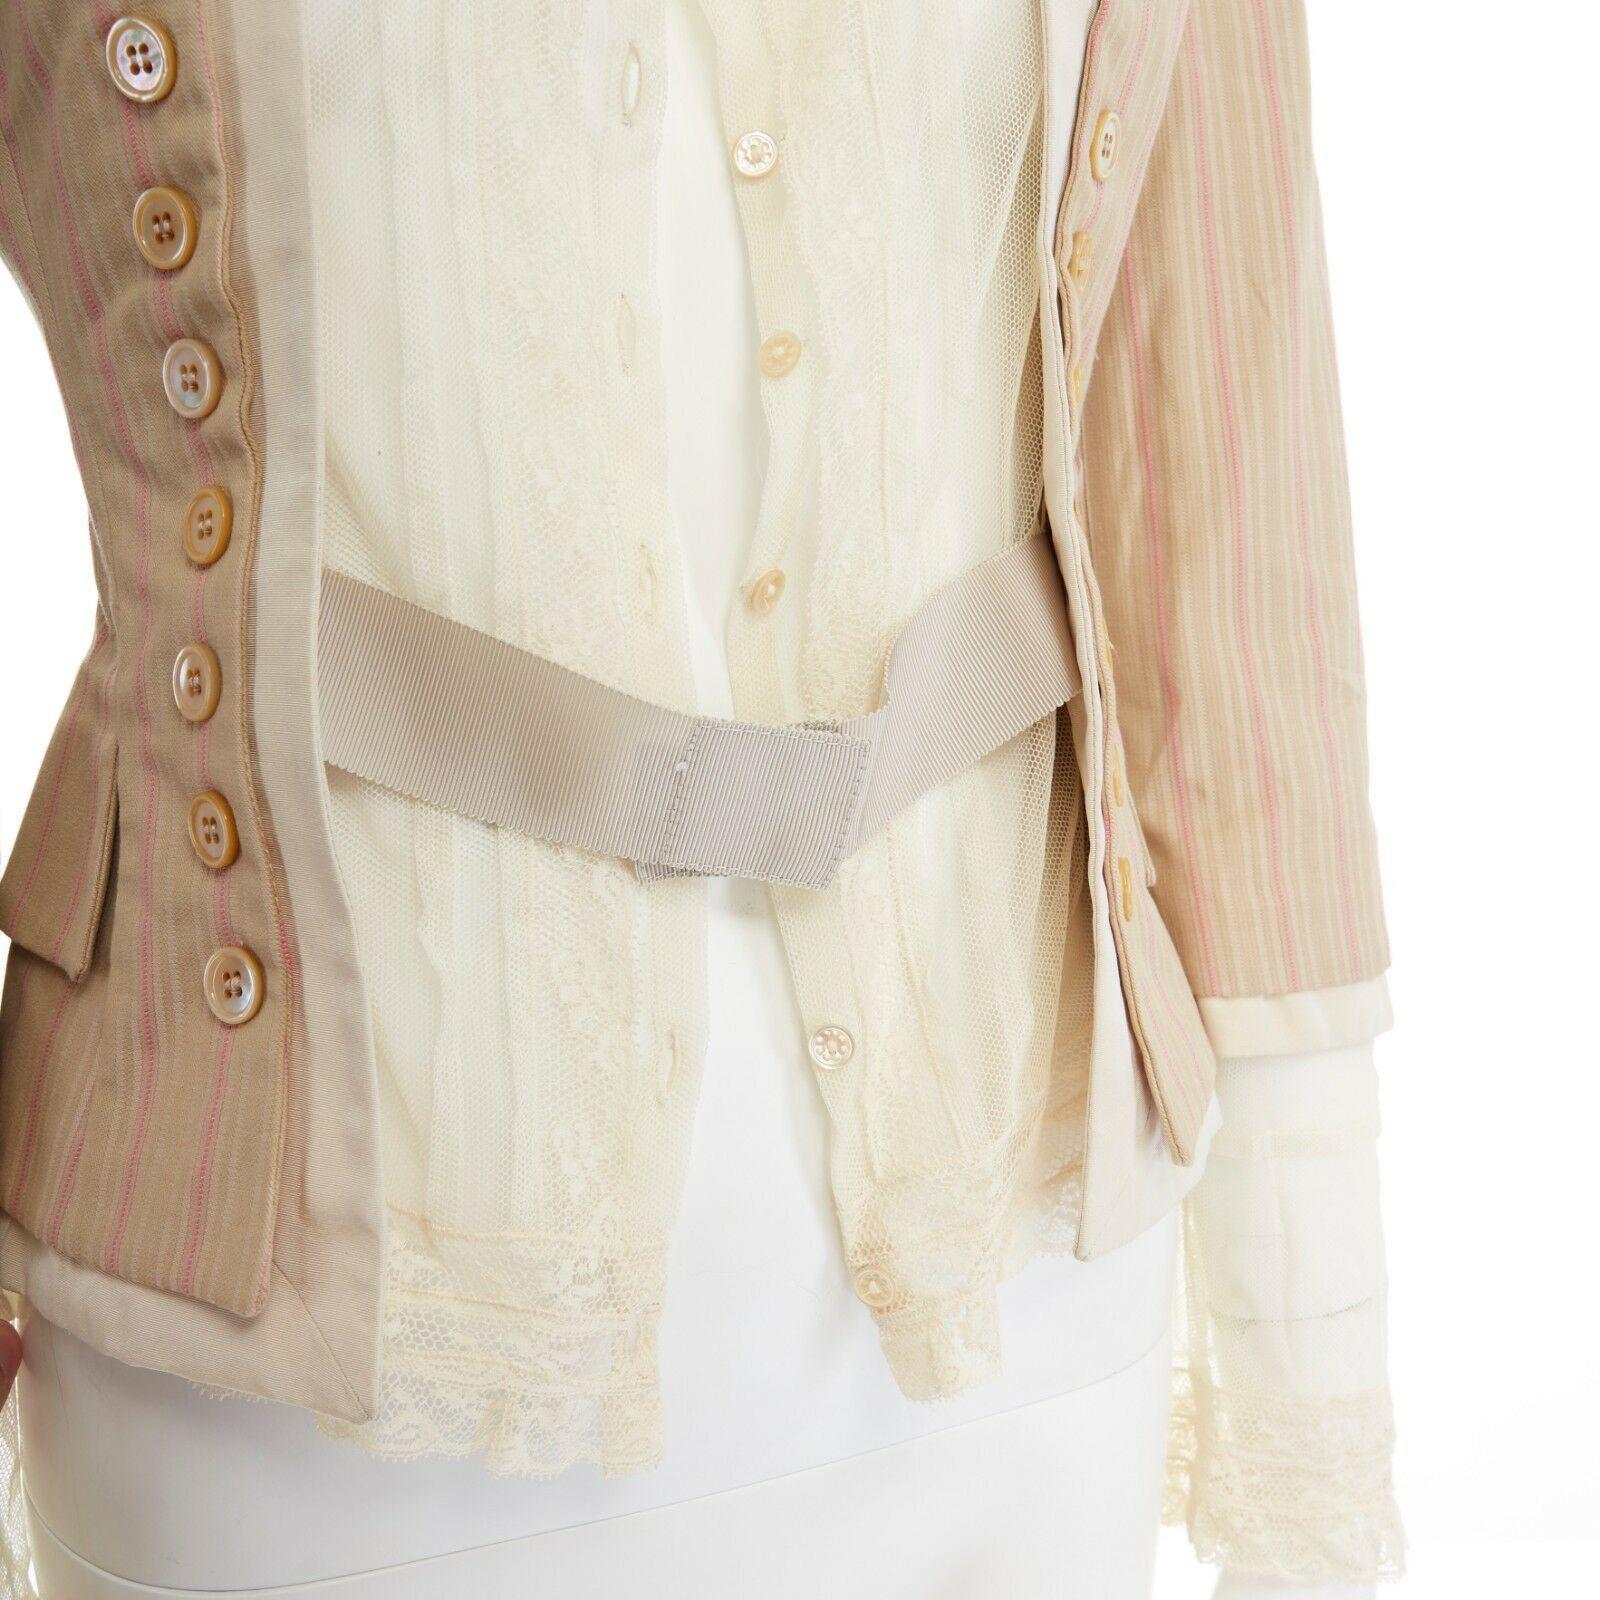 ALEXANDER MCQUEEN 2004 beige pink stripe cotton lace trimmed jacket IT38 XS

ALEXANDER MCQUEEN
FROM THE 2004 COLLECTION
Beige and pink striped cotton. Cream lace lining. Button front closure. Grosgrain trimmed collar. 3/4 sleeves. Sheer lace trimmed